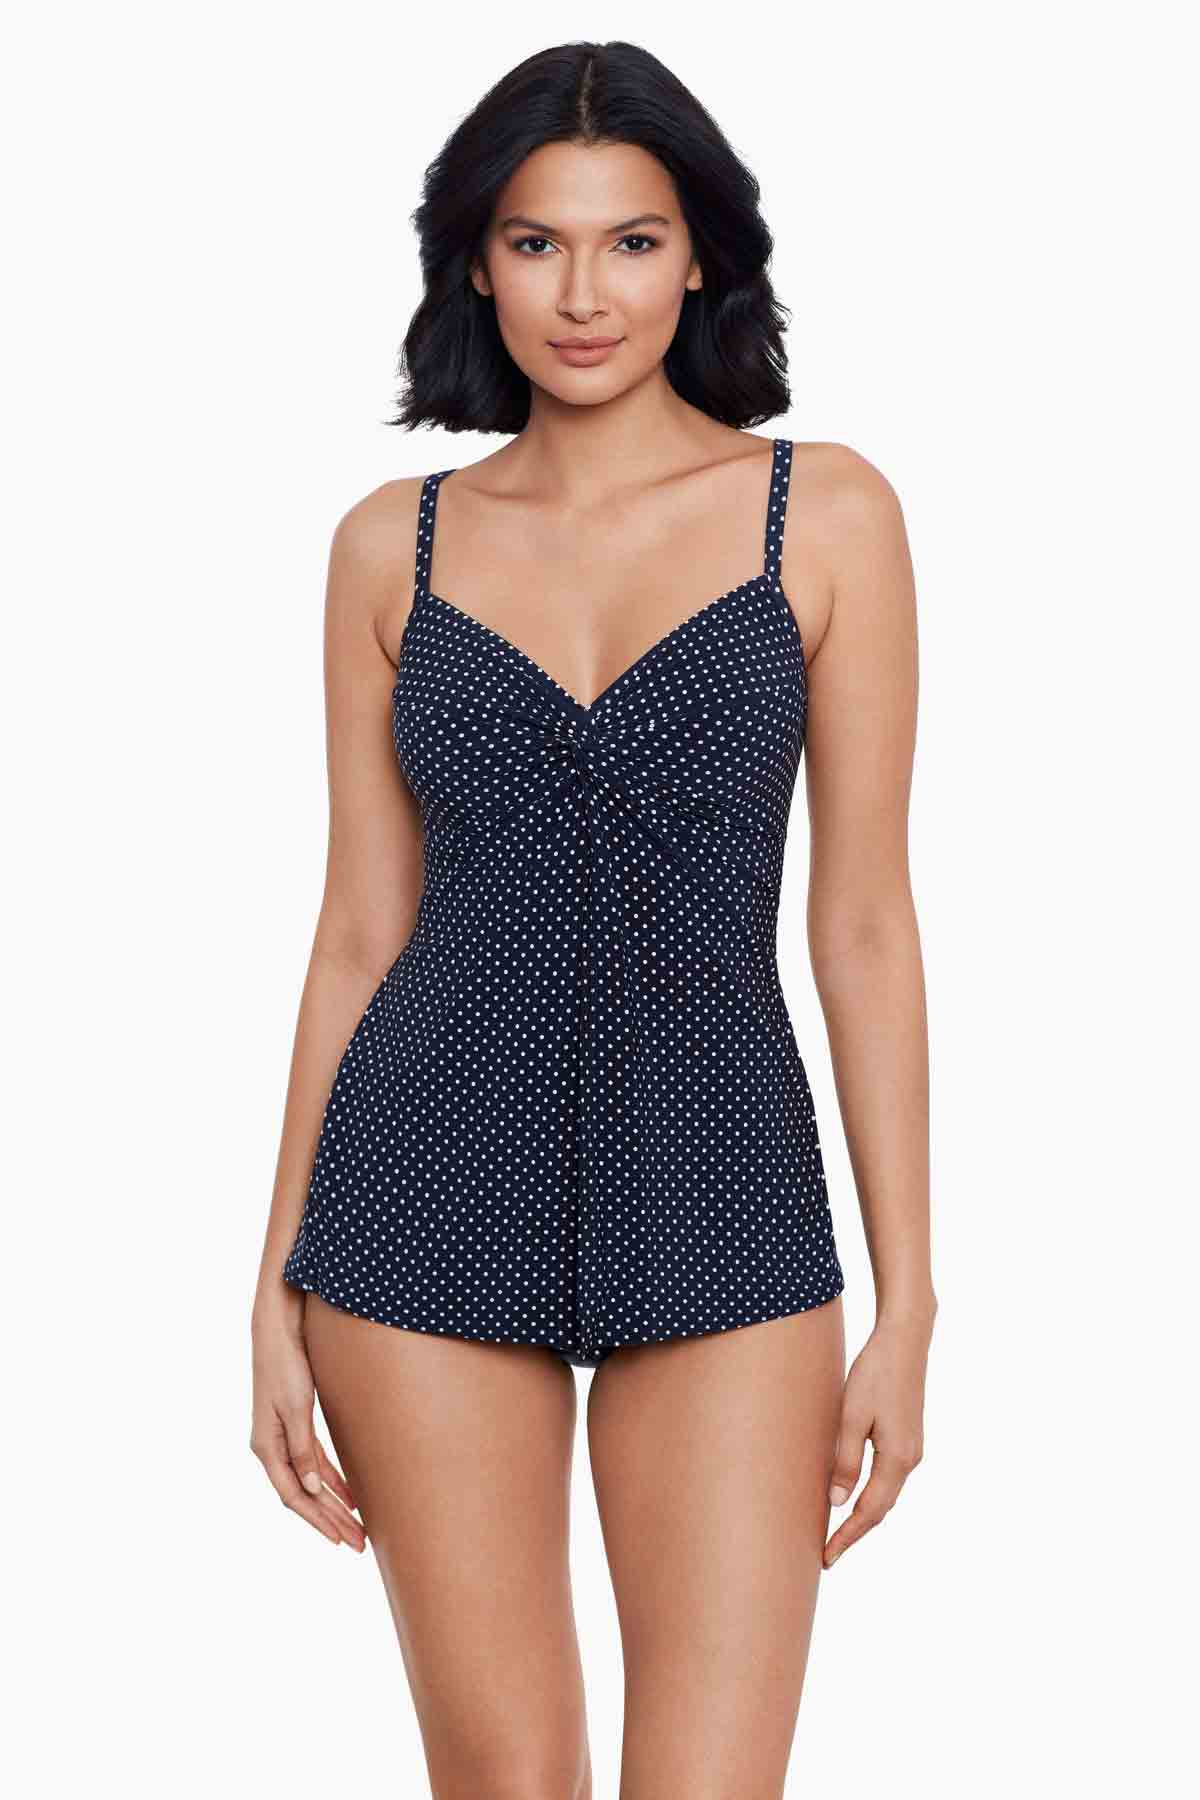 Miraclesuit Women's Swimwear DD-Cup Pin Point Love Knot Sweetheart